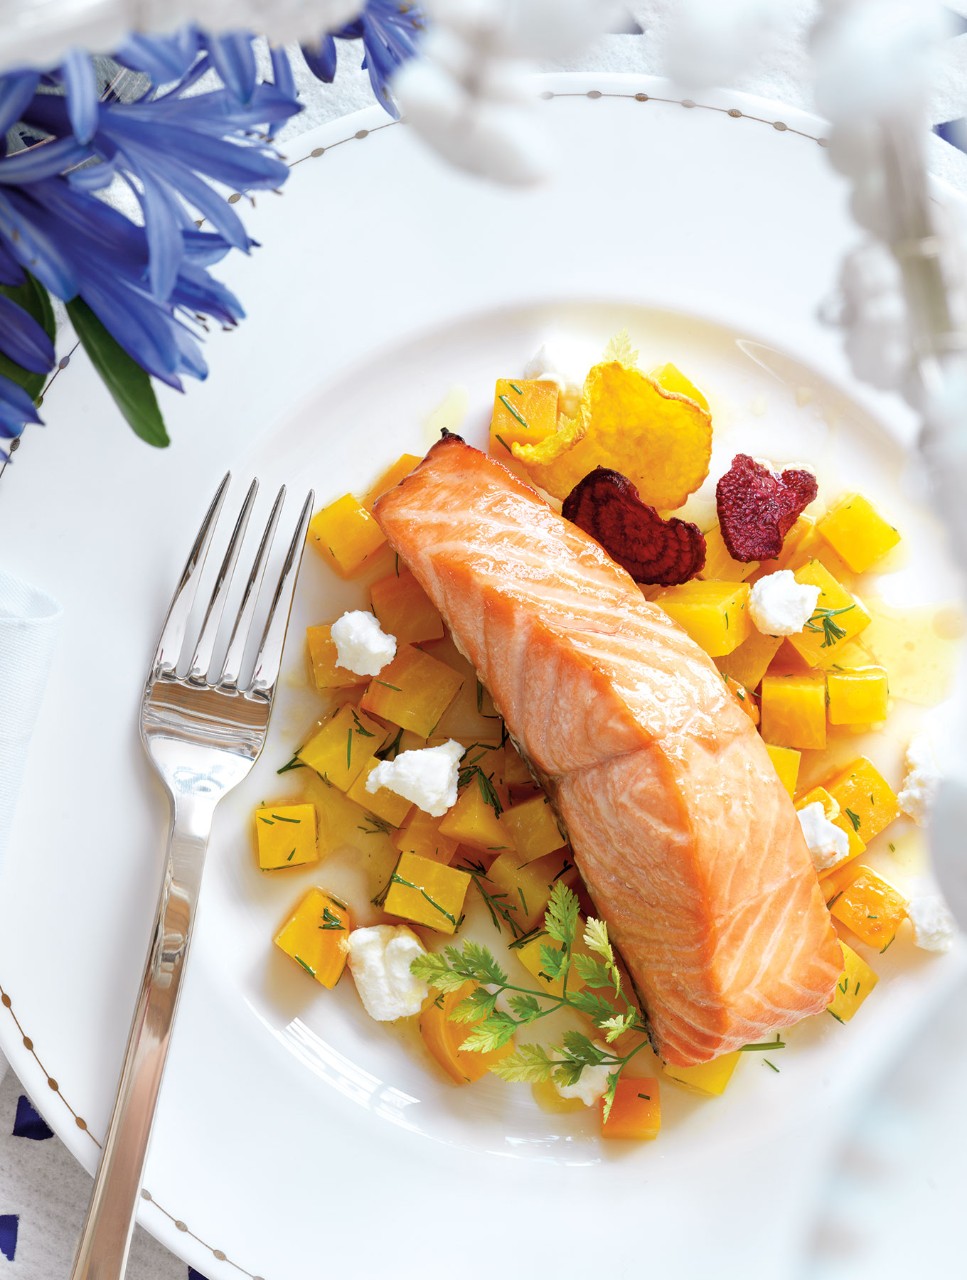 Maple Roasted Salmon with Winter Beets, Ricotta and Dill